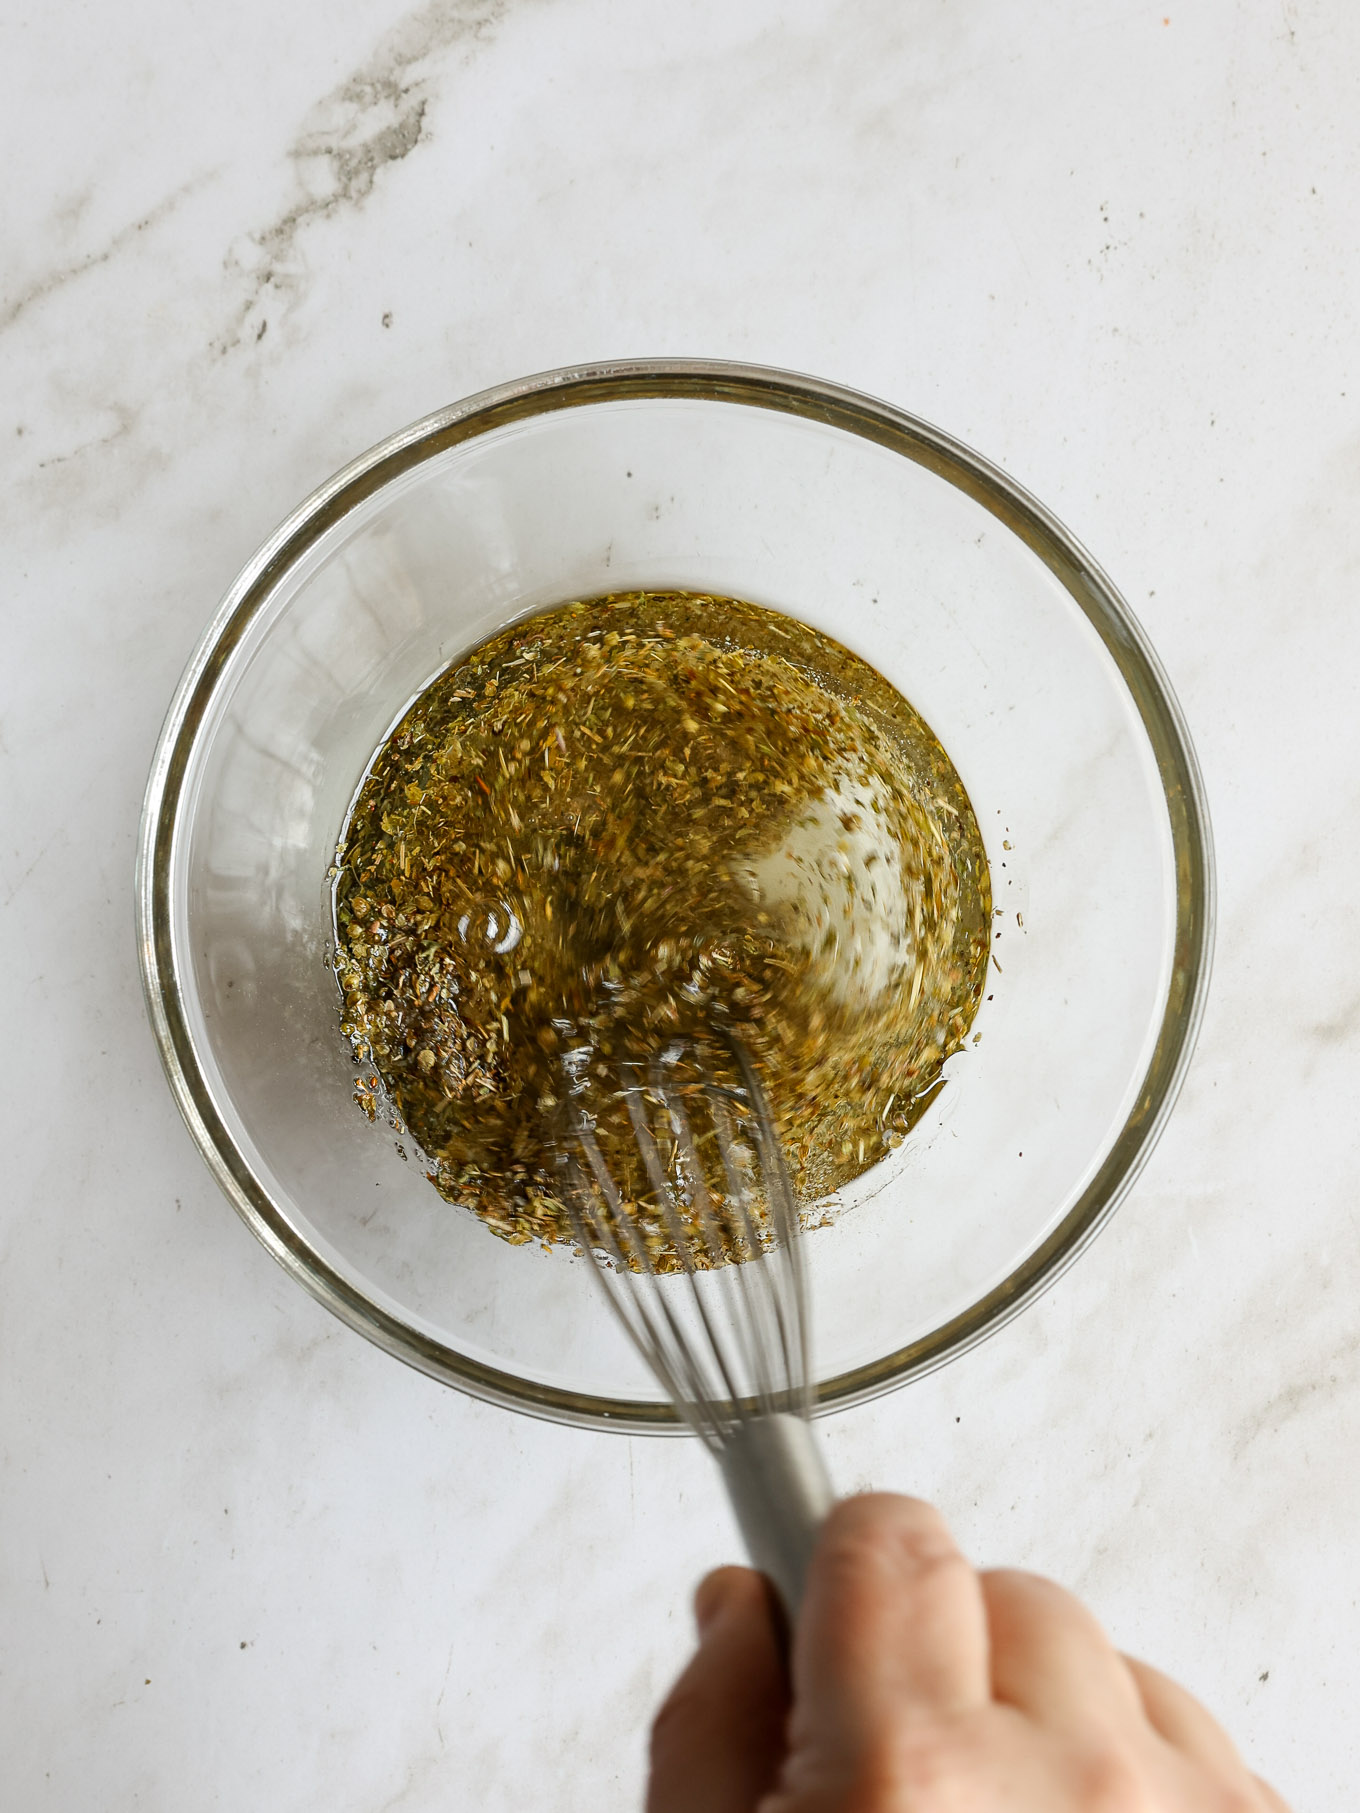 oil with spices in a glass bowl being whisked.